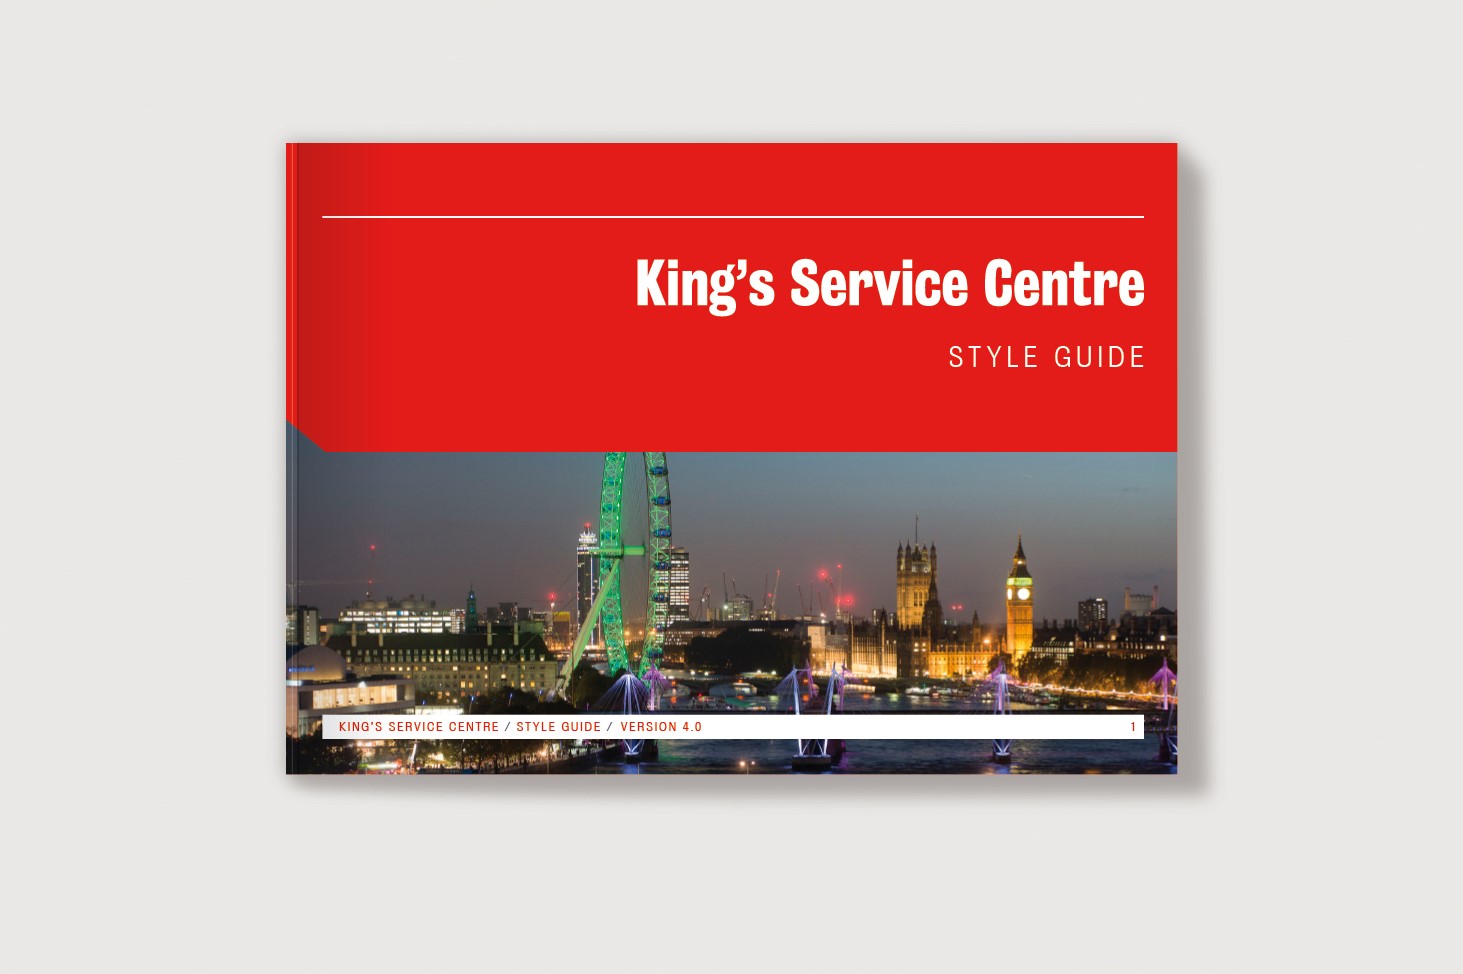 Visual of the style guide for King's Service Centre